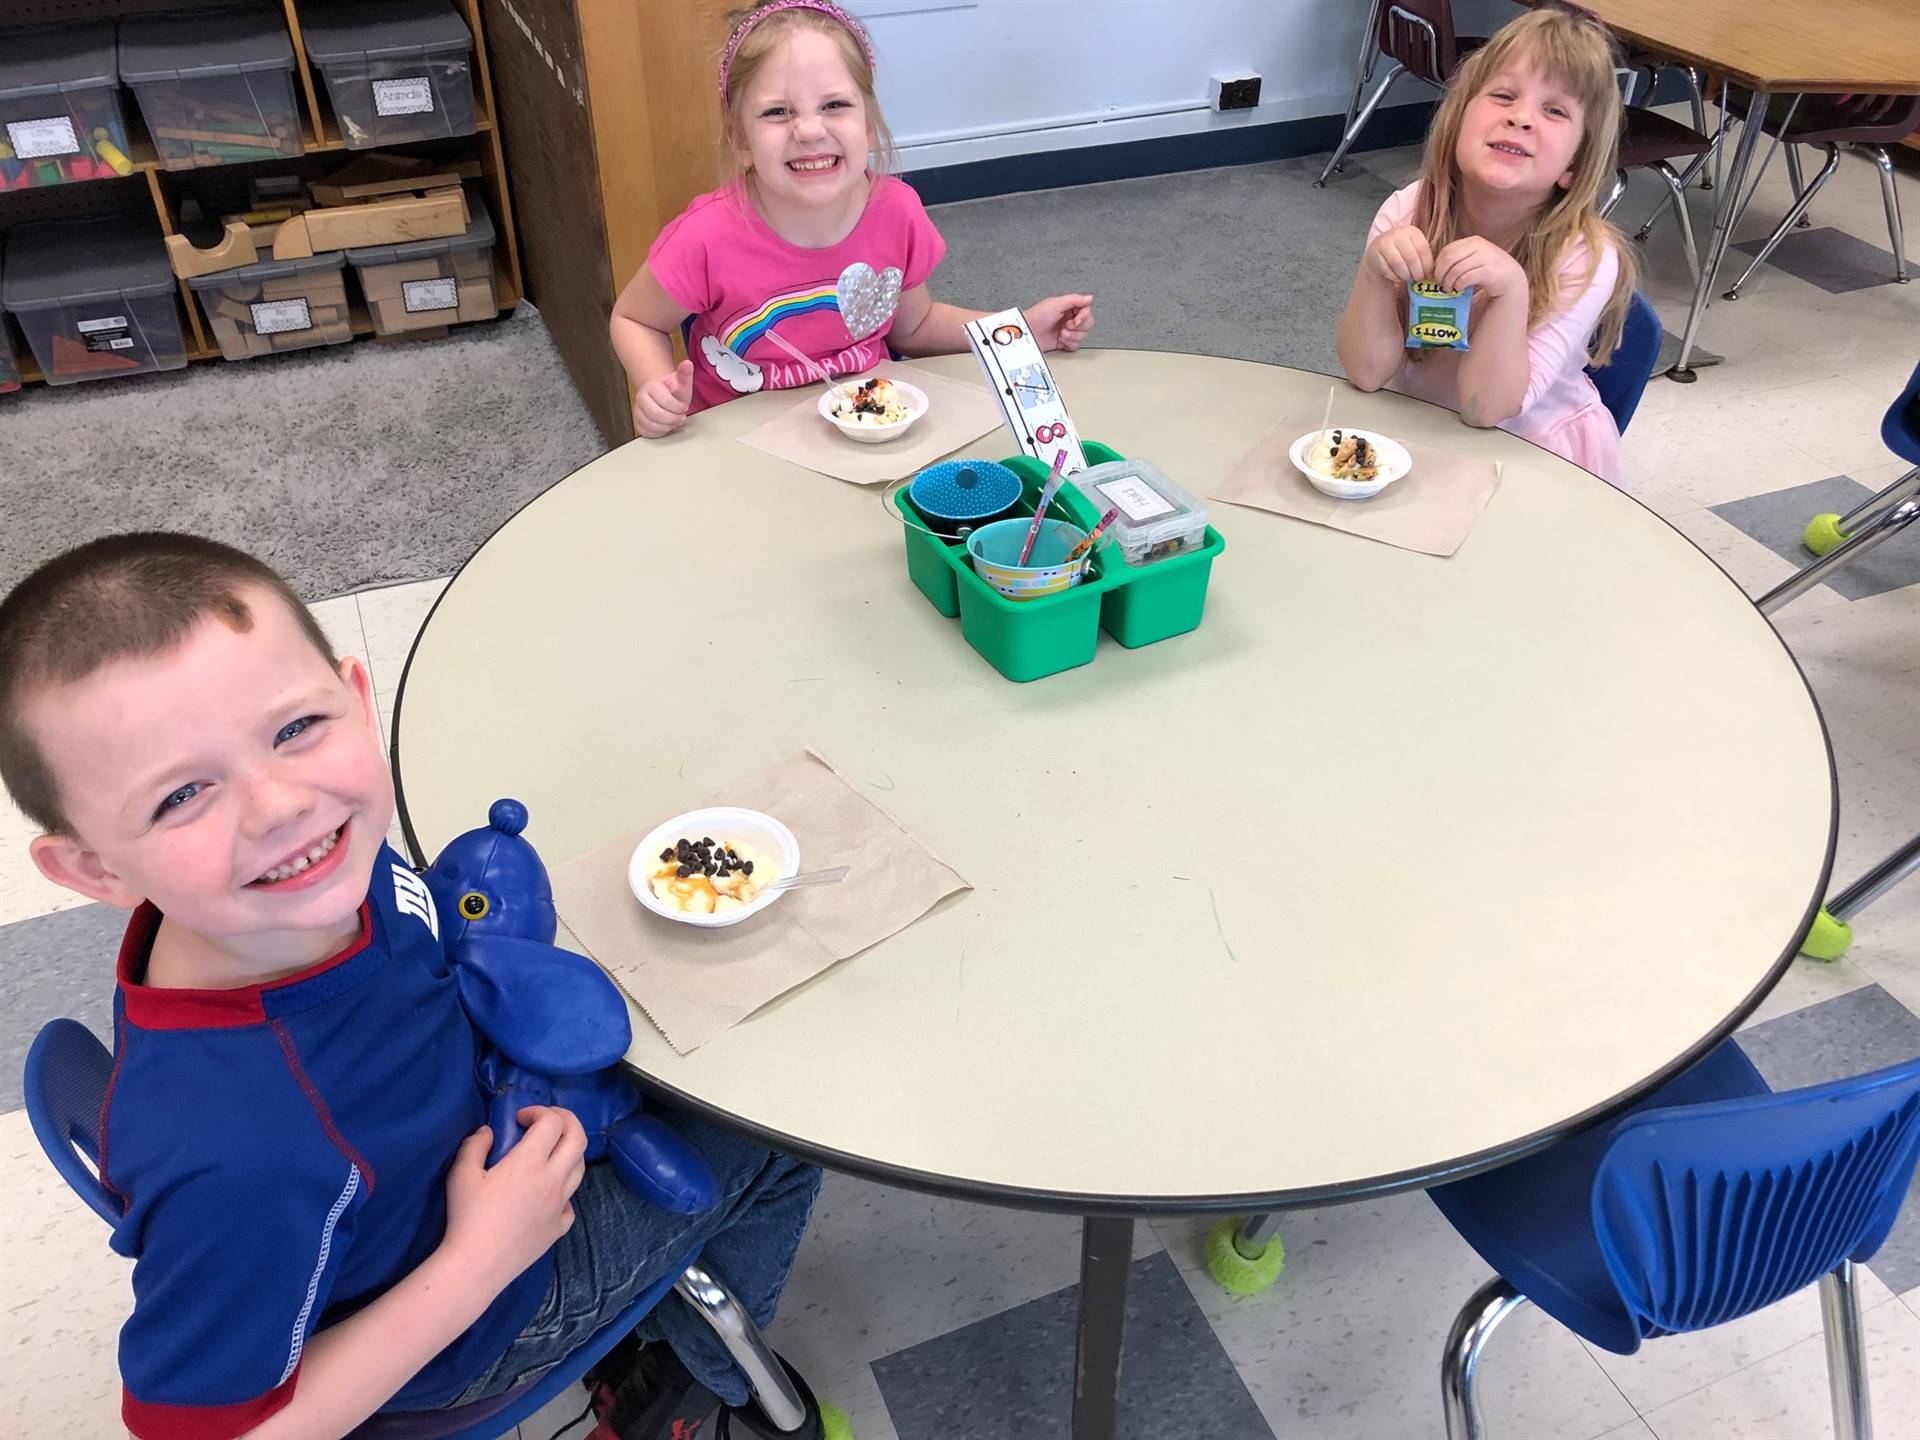 3 students enjoy a hard earned ice cream party